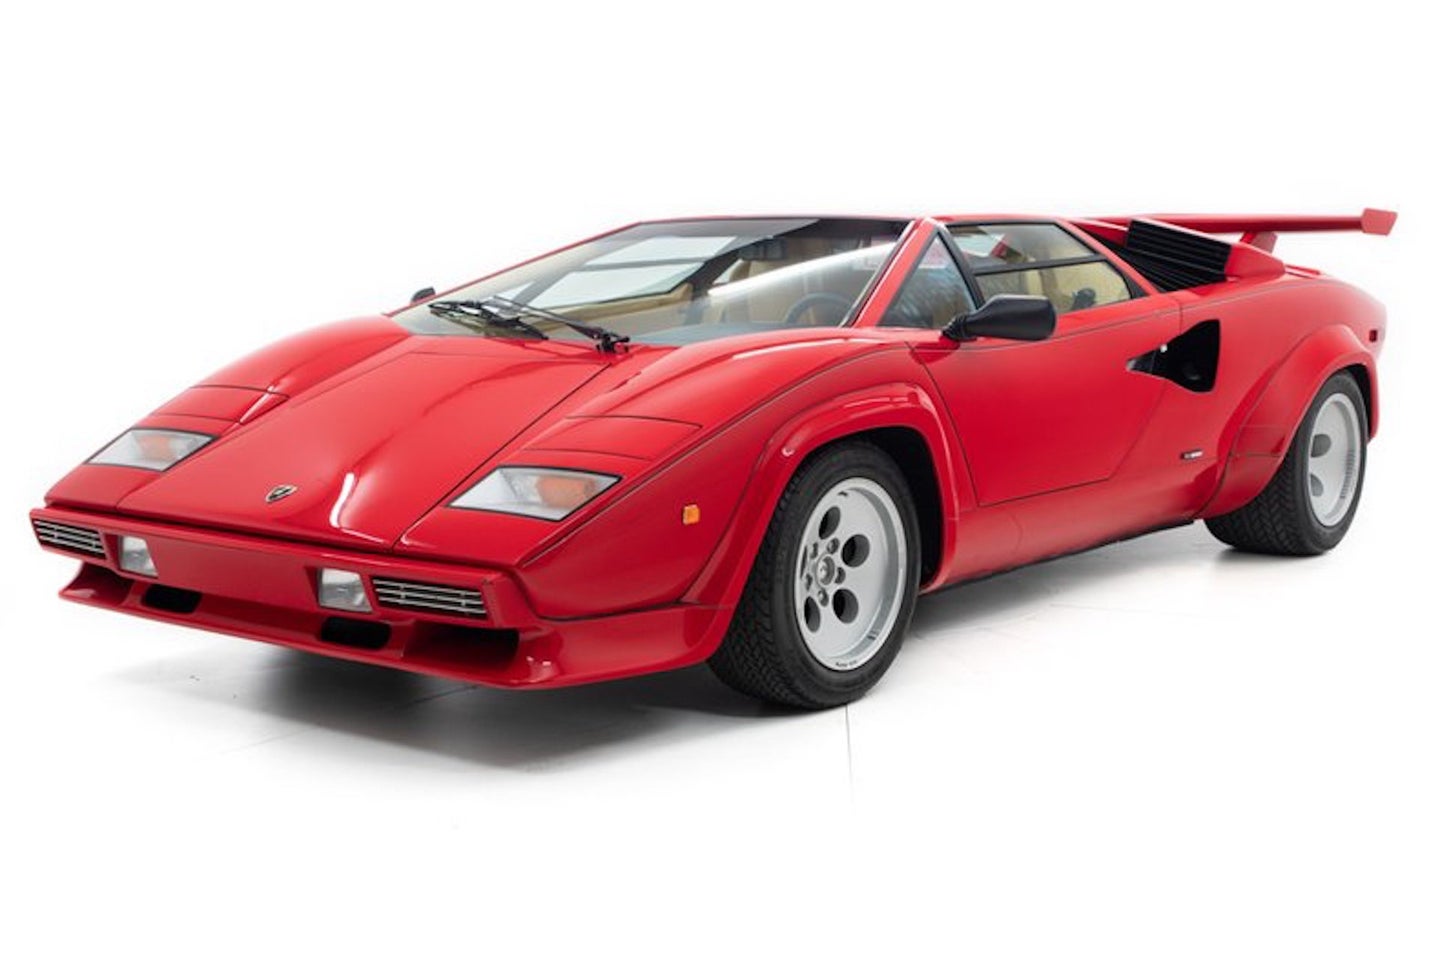 1984 Lamborghini Countach Owned by Mario Andretti Listed for Sale at Nearly $500K